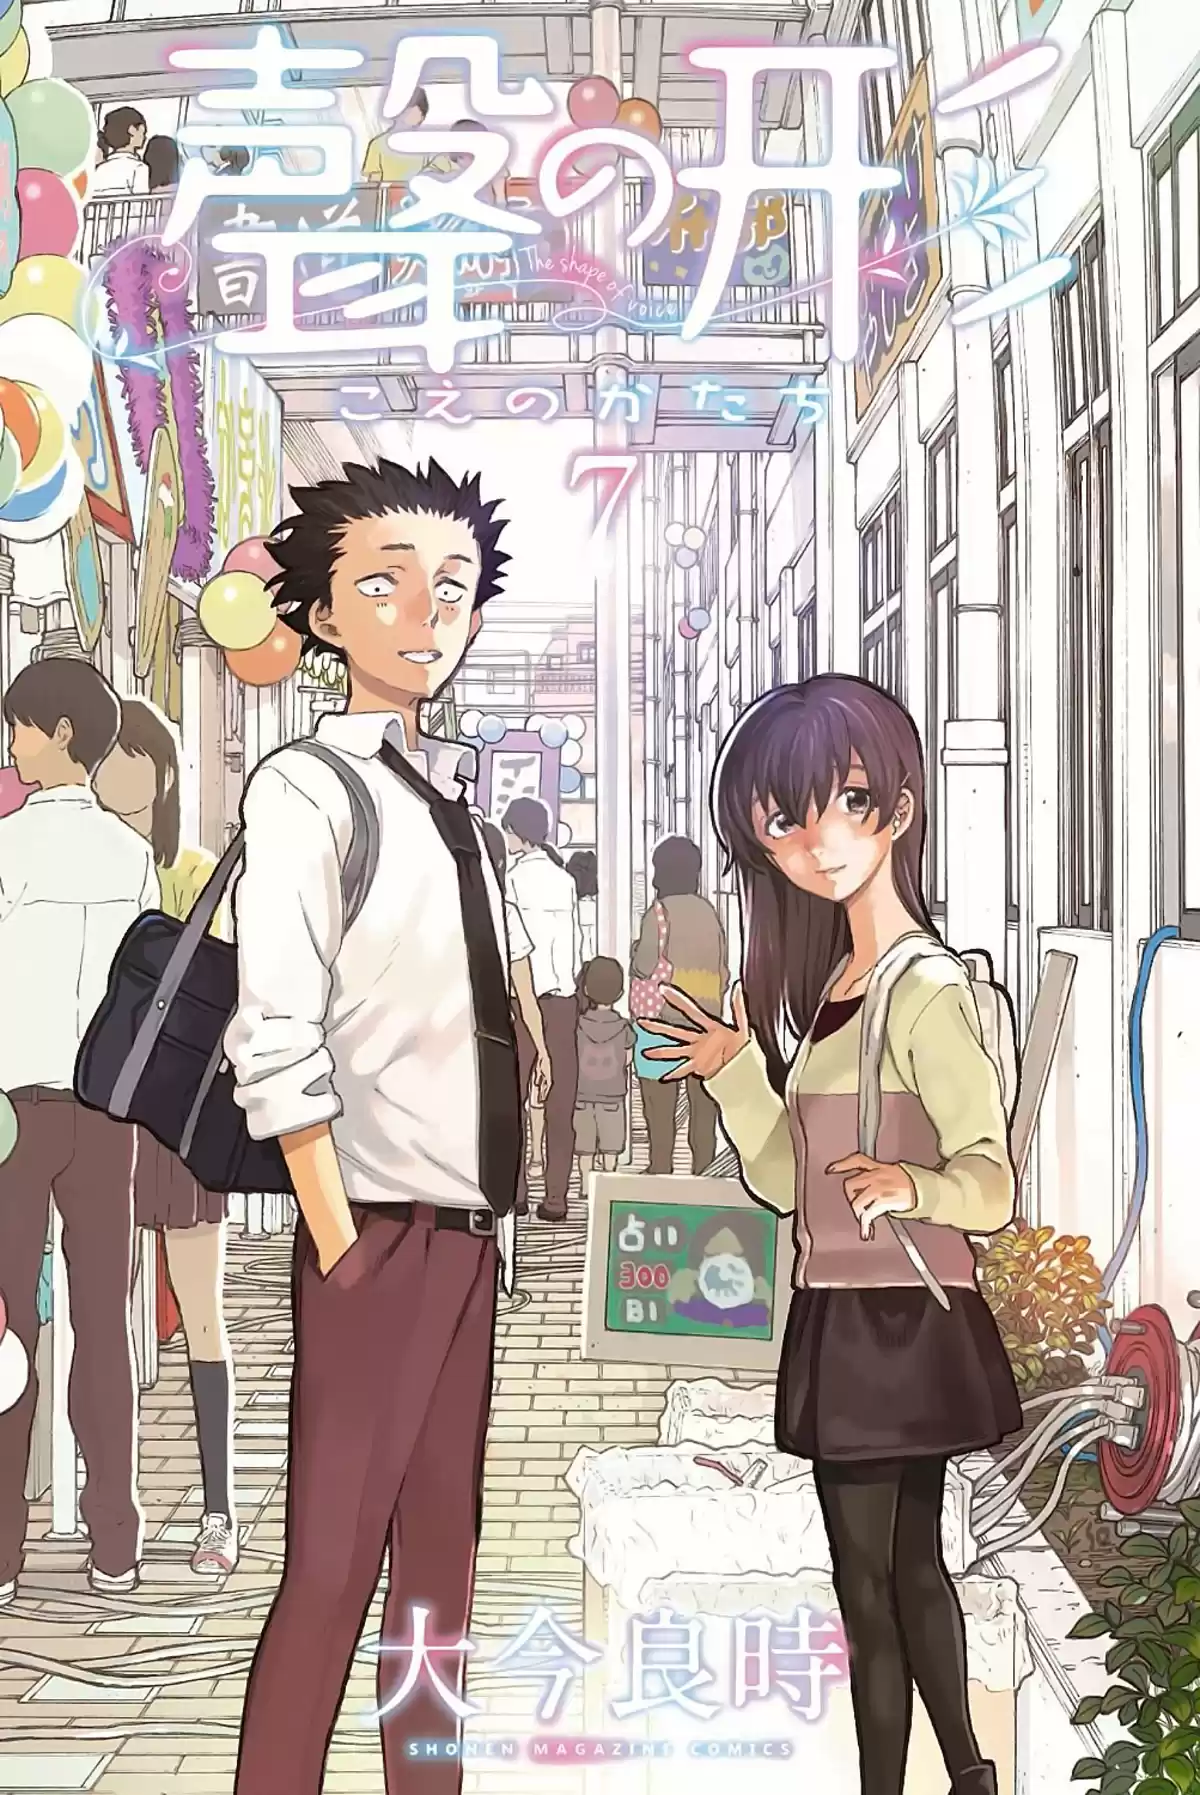 A Silent Voice Volume 7 page 1